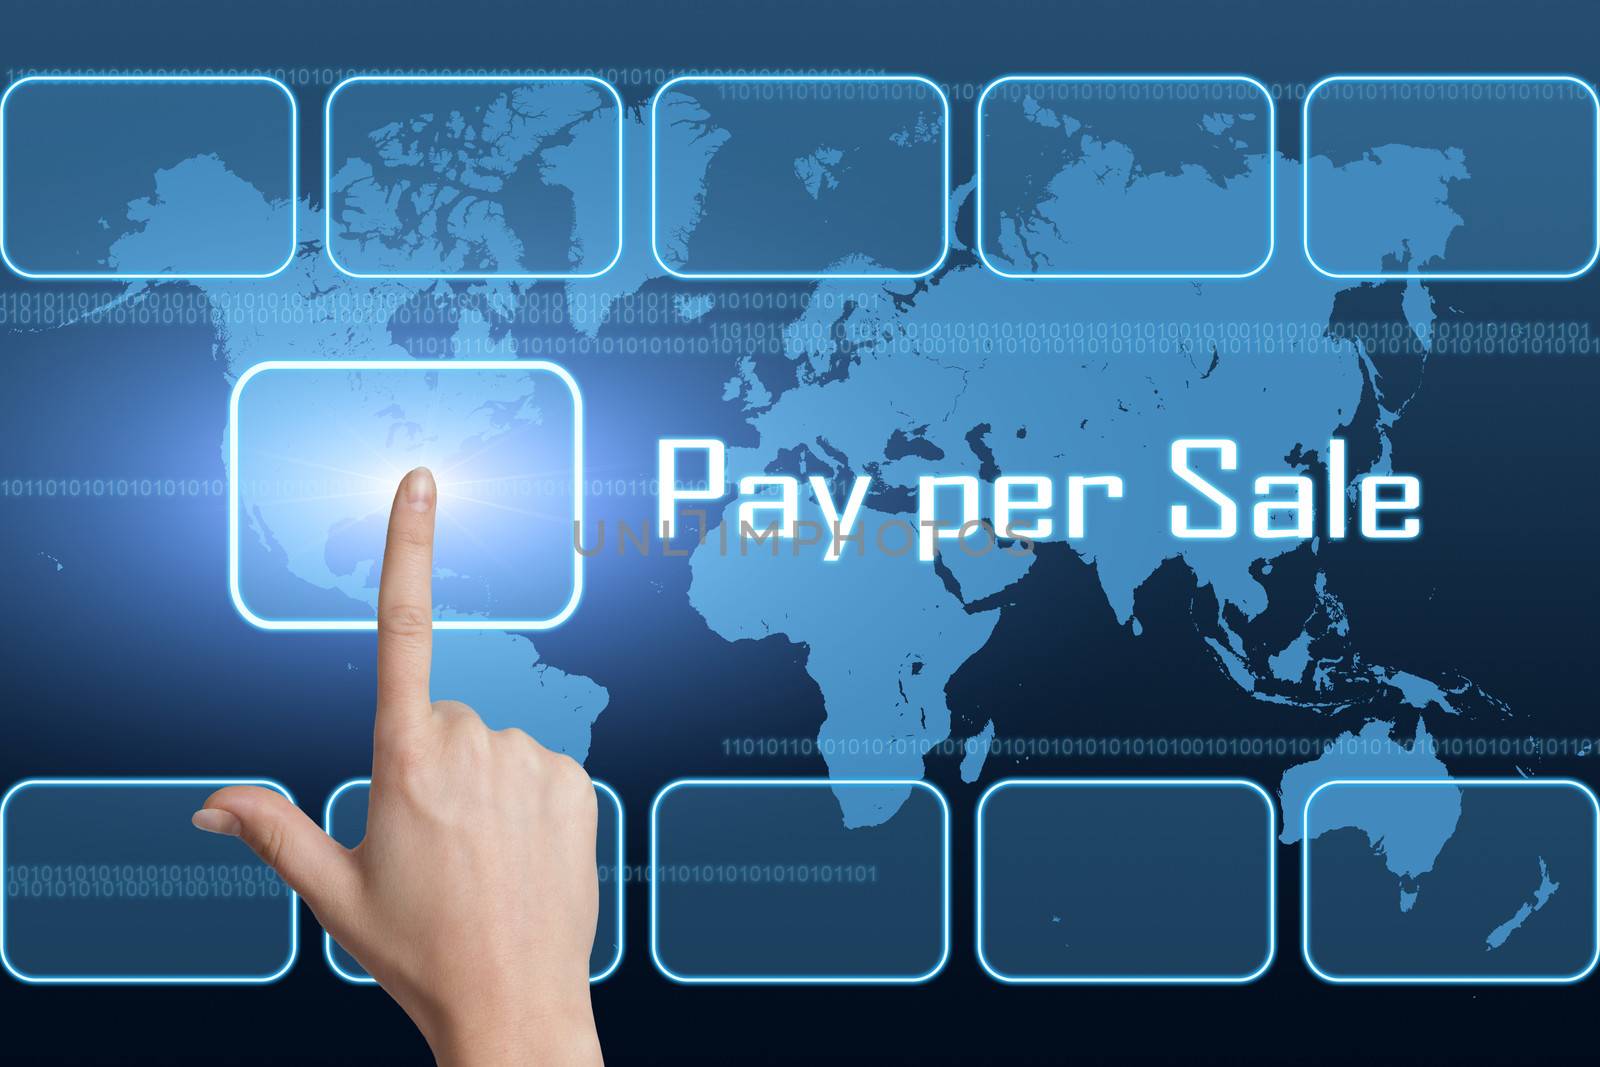 Pay per Sale concept with interface and world map on blue background